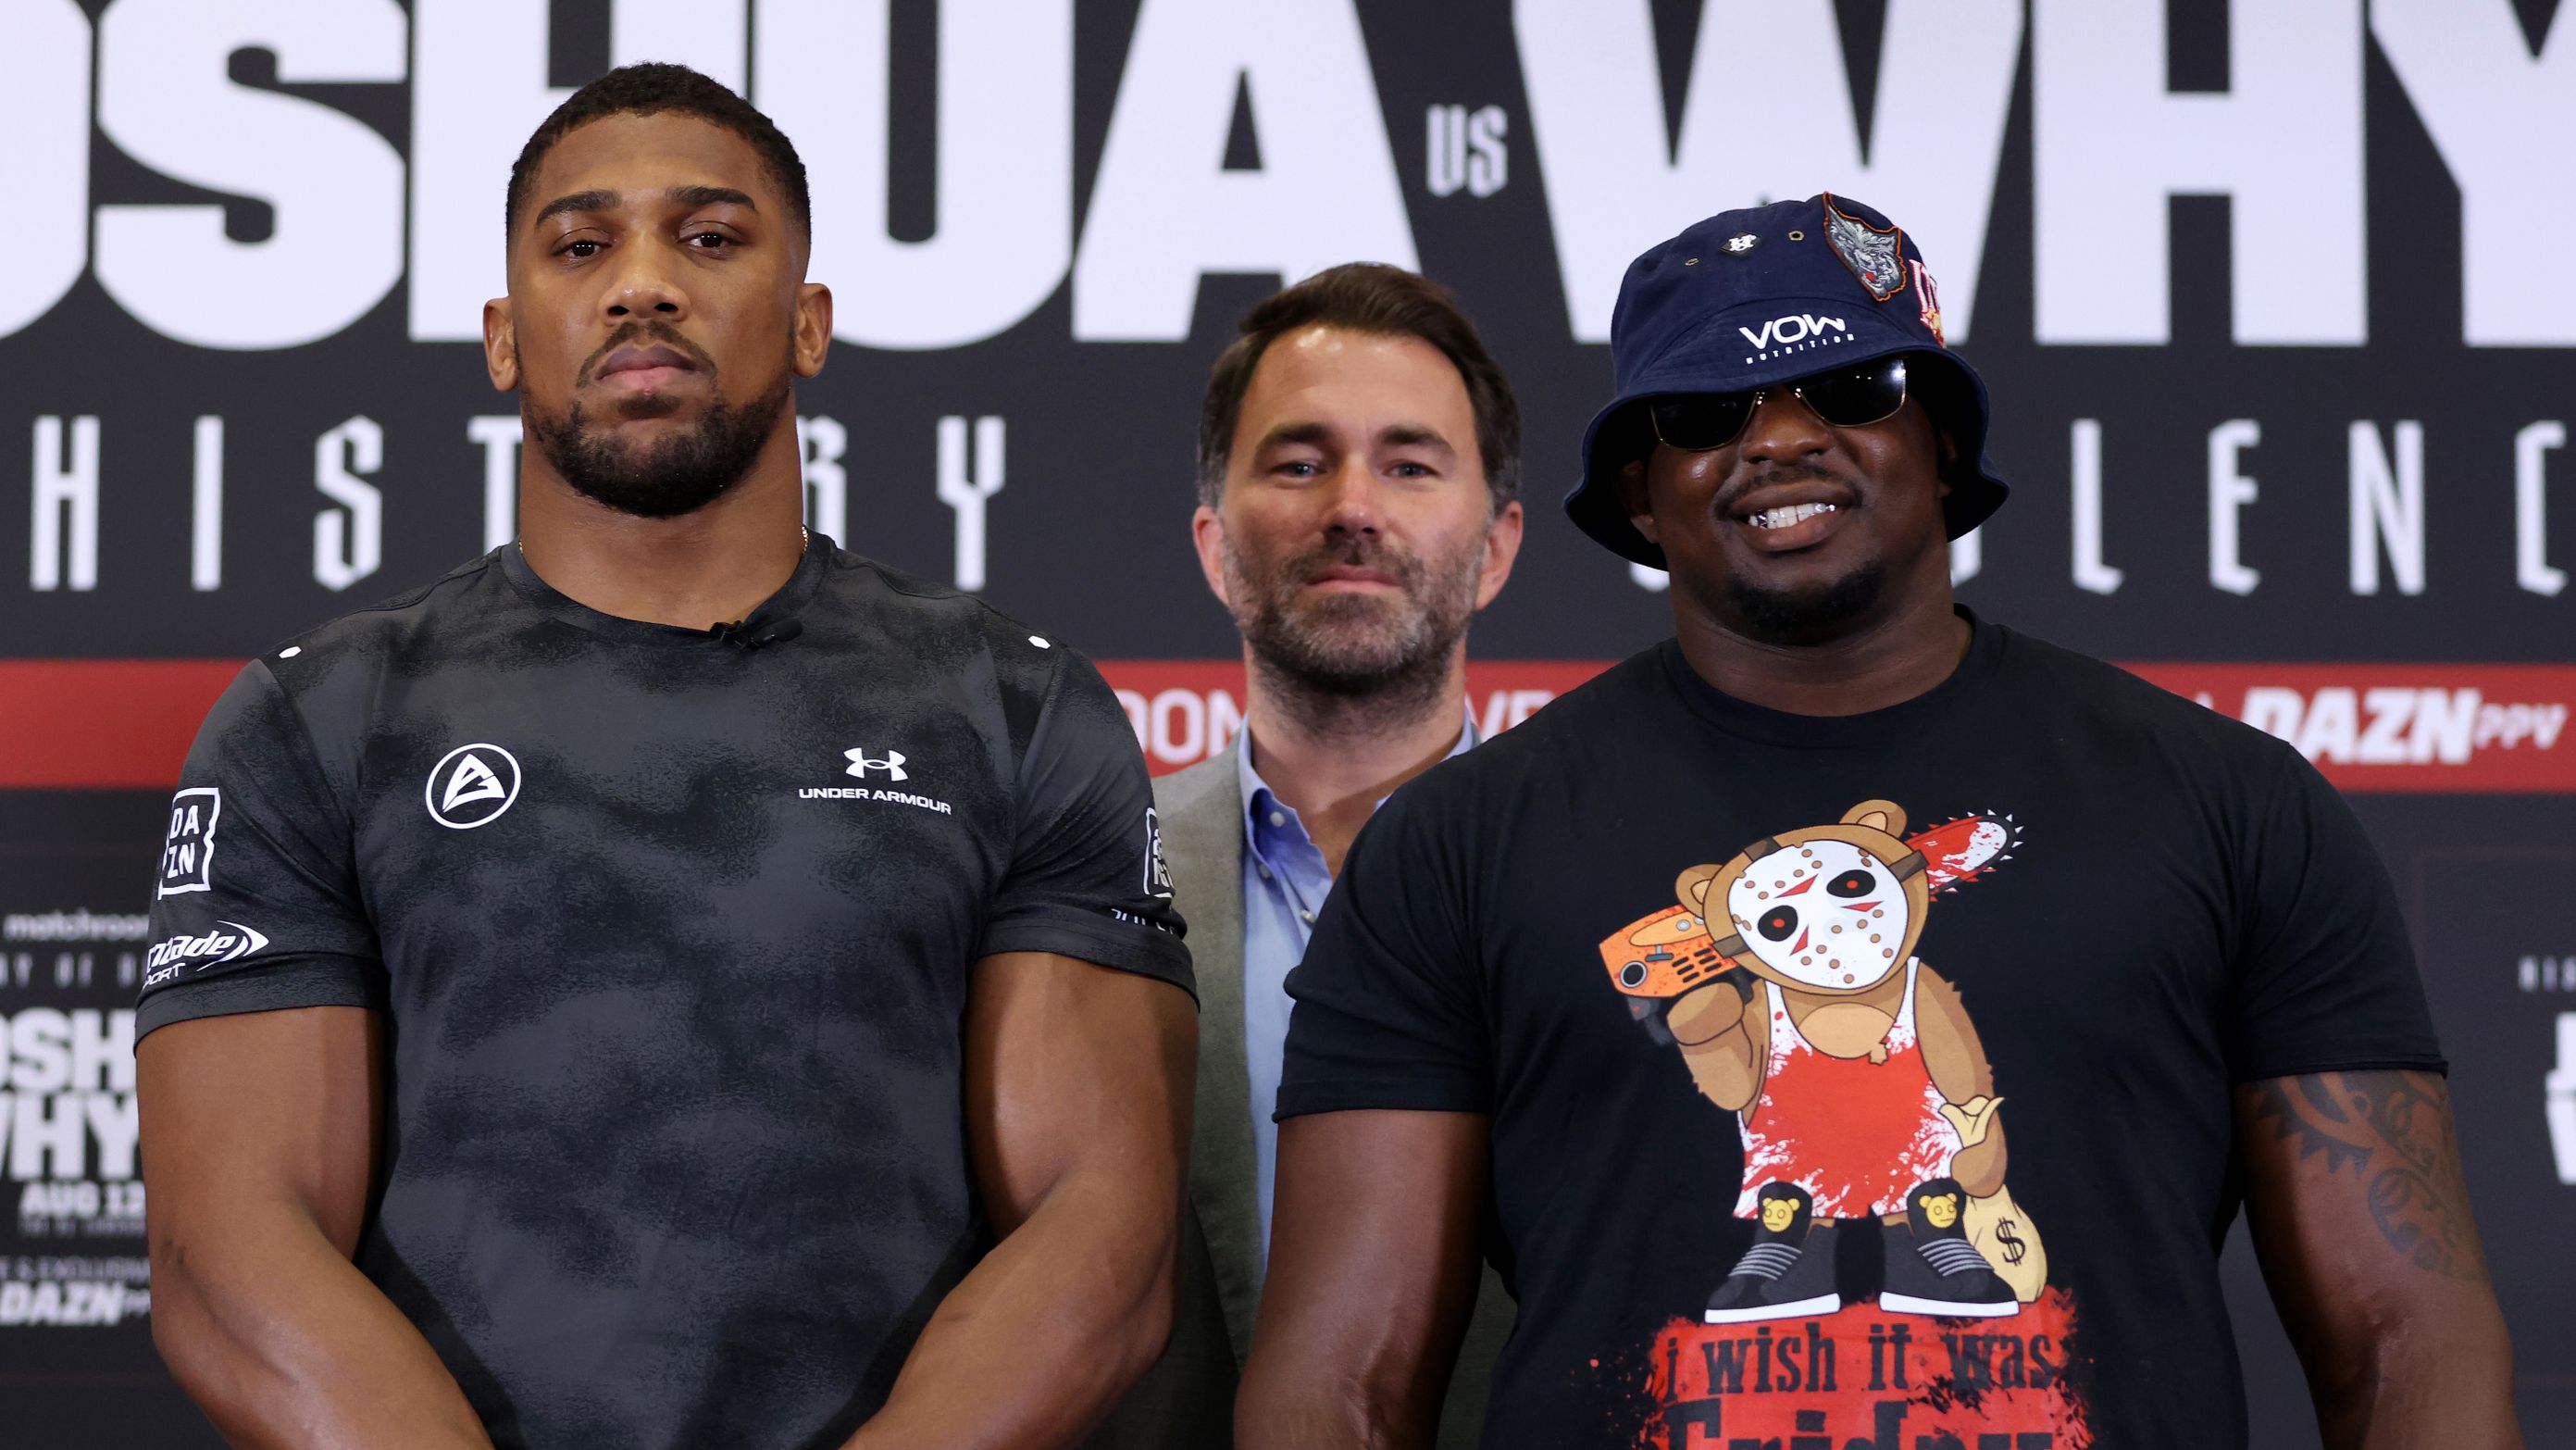 Anthony Joshua (left) with promoter Eddie Hearn (middle) and Dillian Whyte (right) during a press conference.